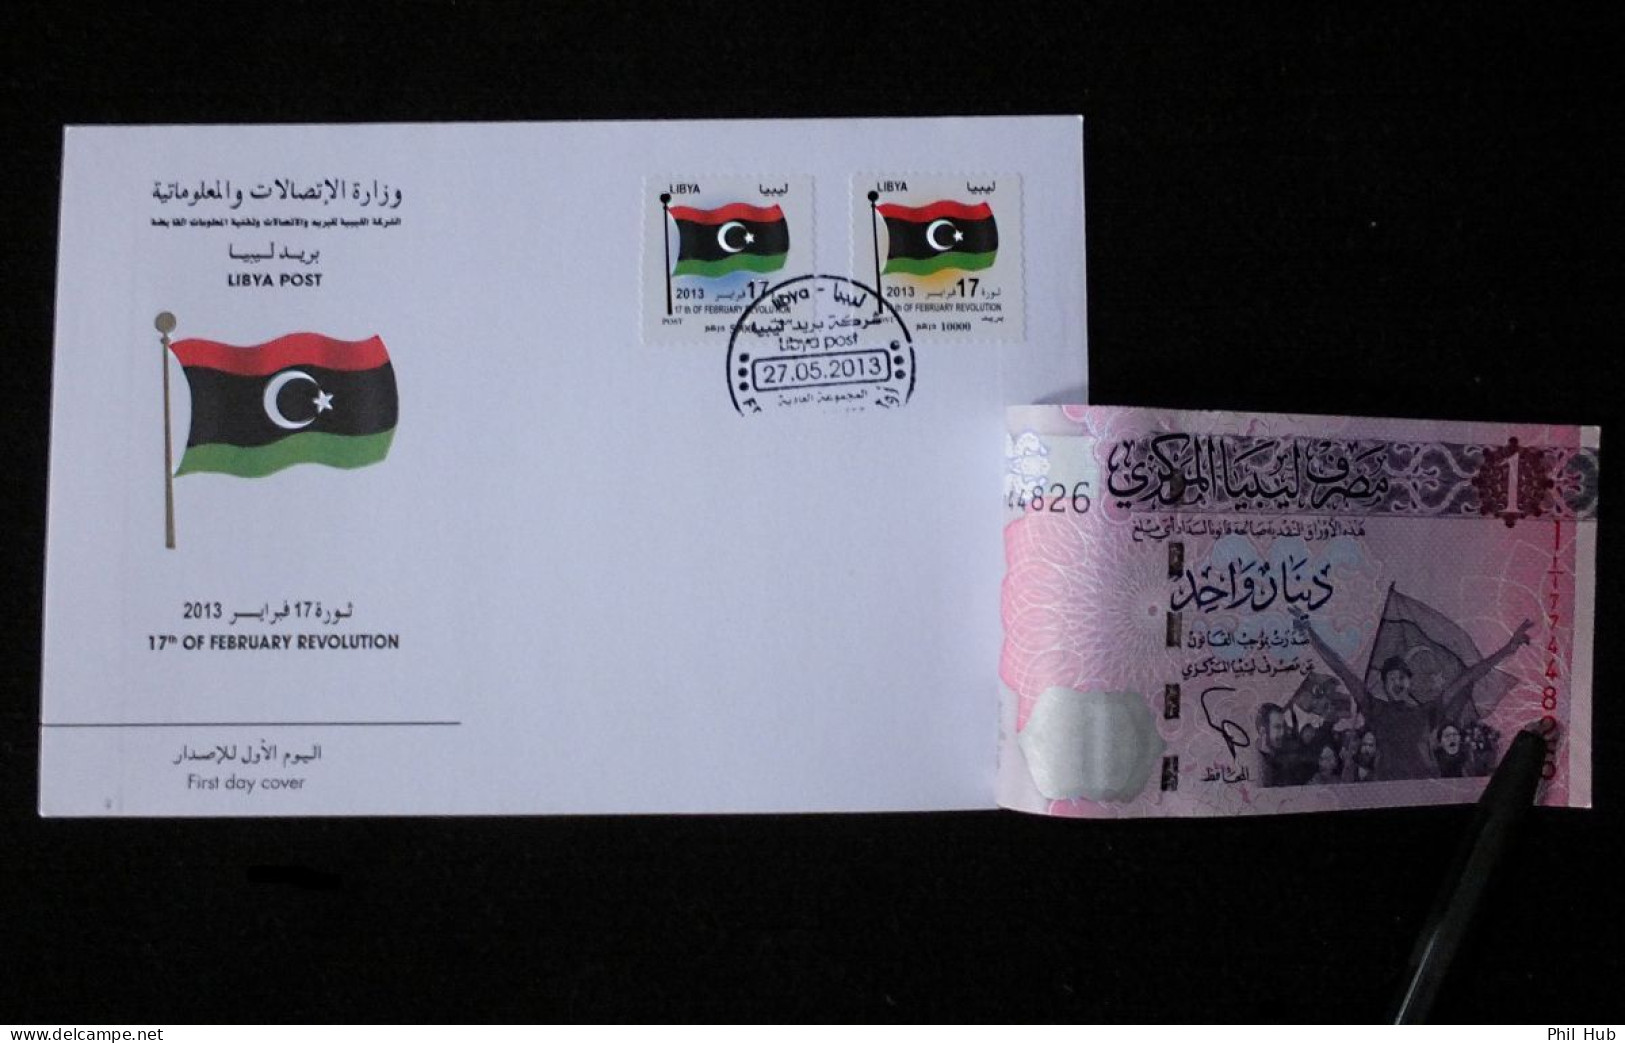 LIBYA 2013 "The Revolution FDC" NEW LIBYA FLAG STAMPS And BANKNOTE On FDC - Libië